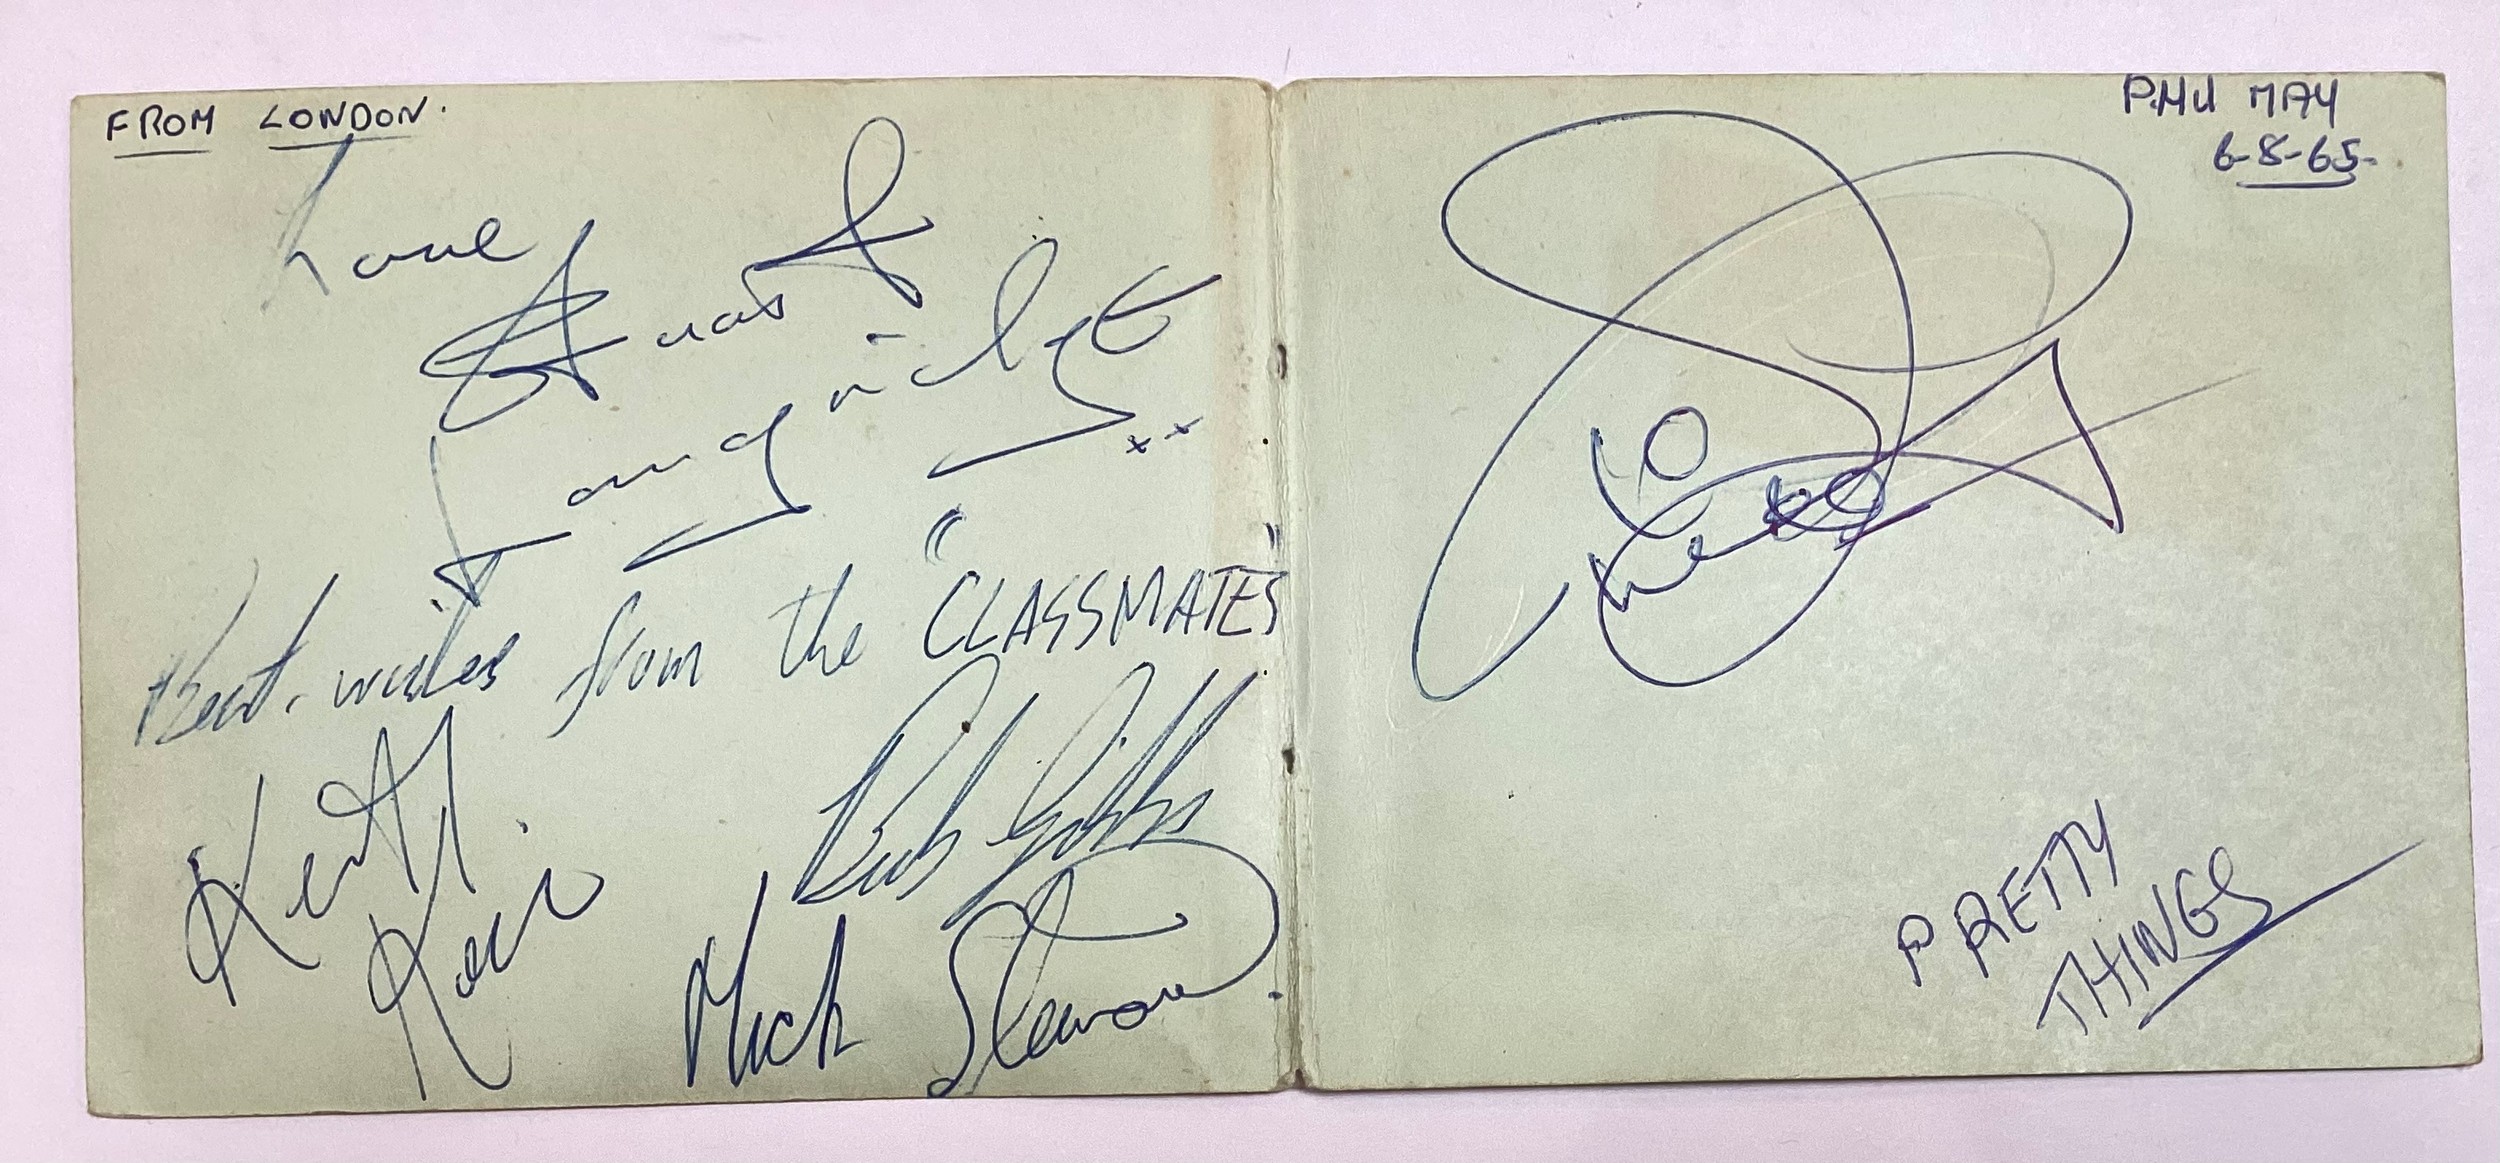 GENUINE 1960’S AUTOGRAPH BOOK CONTAINING VARIOUS POP / ROCK STARS. The book has seen better days - Image 6 of 14